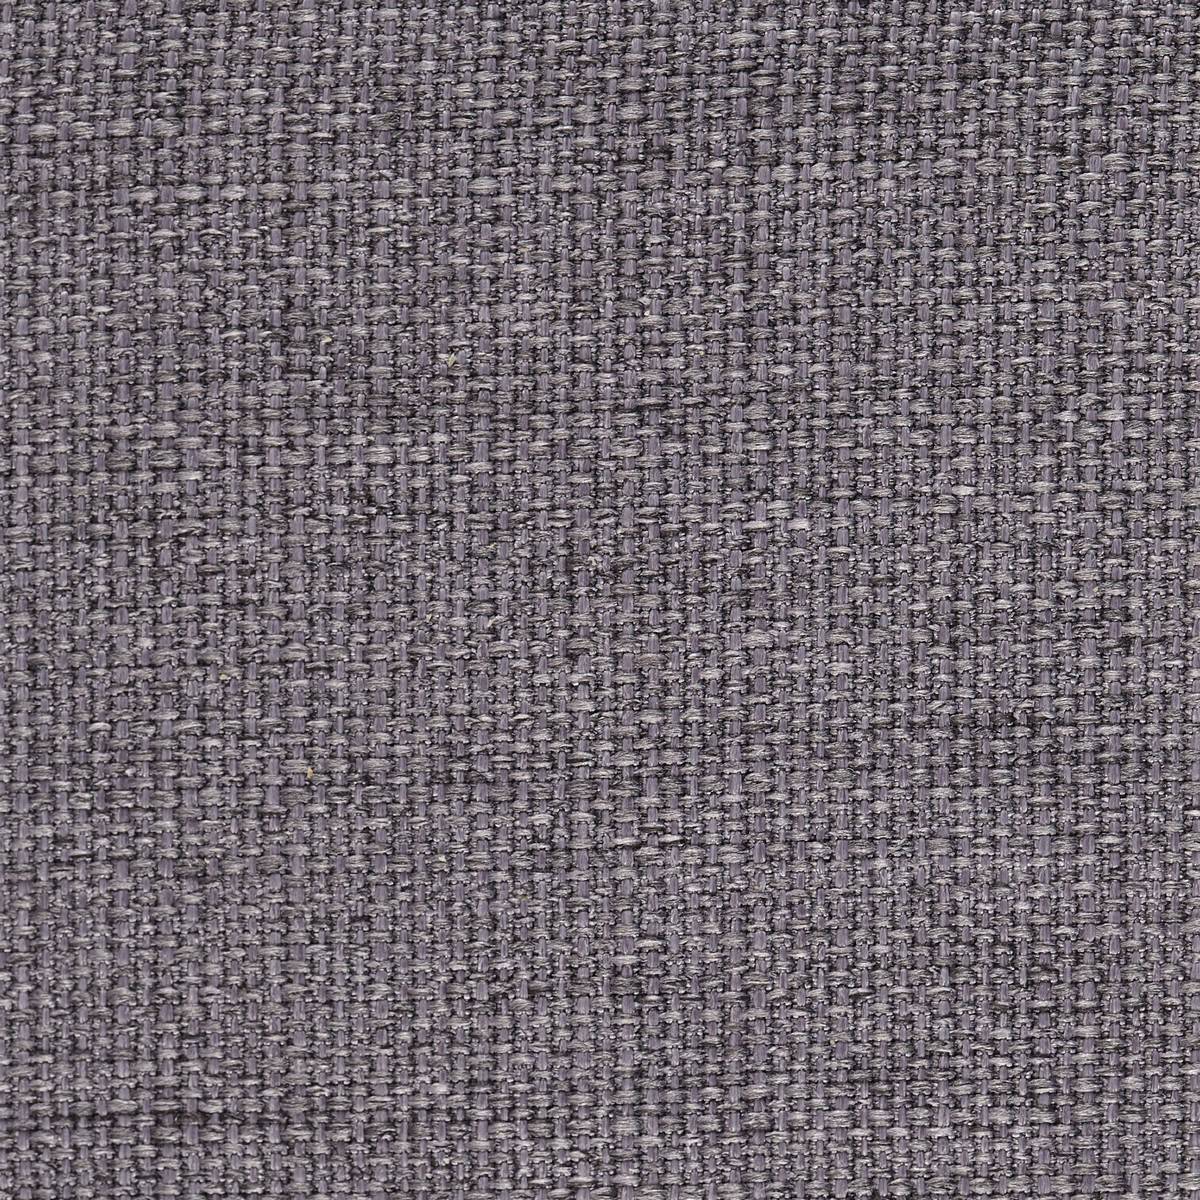 Particle Grape Fabric by Harlequin